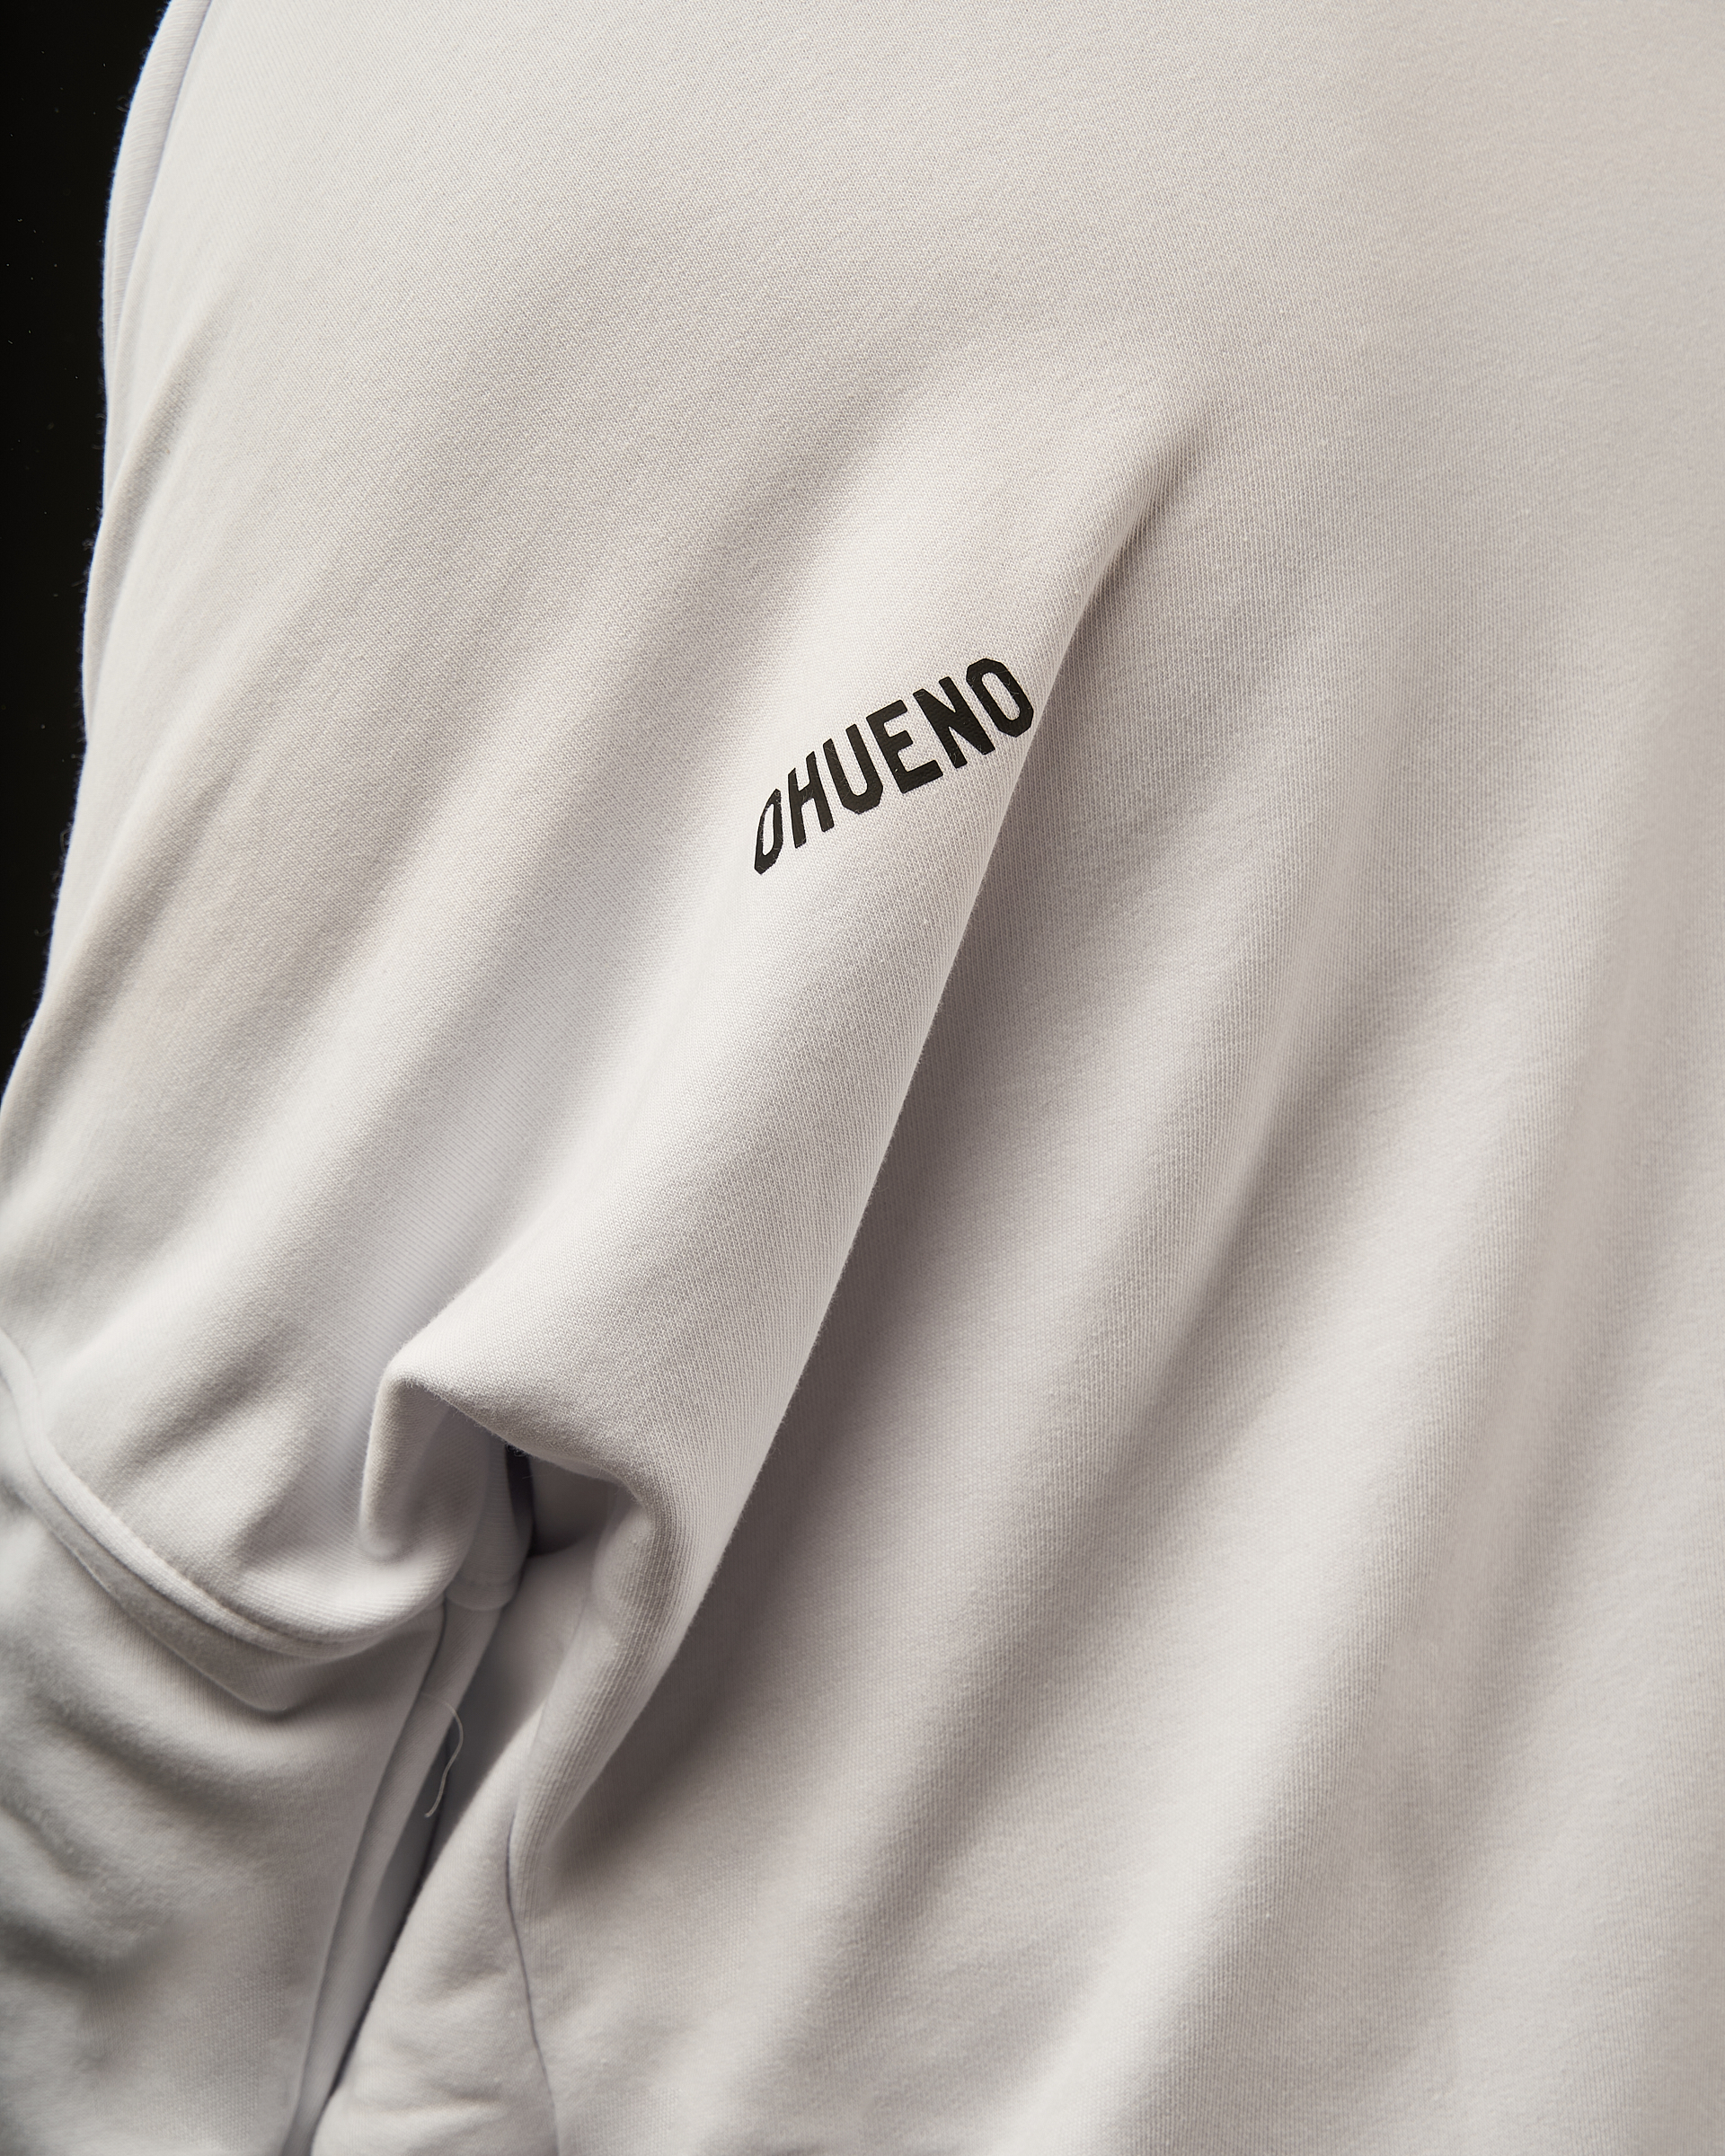 Oversized hoodie (white) Image: https://ohueno-official.com/wp-content/uploads/m01982.jpg